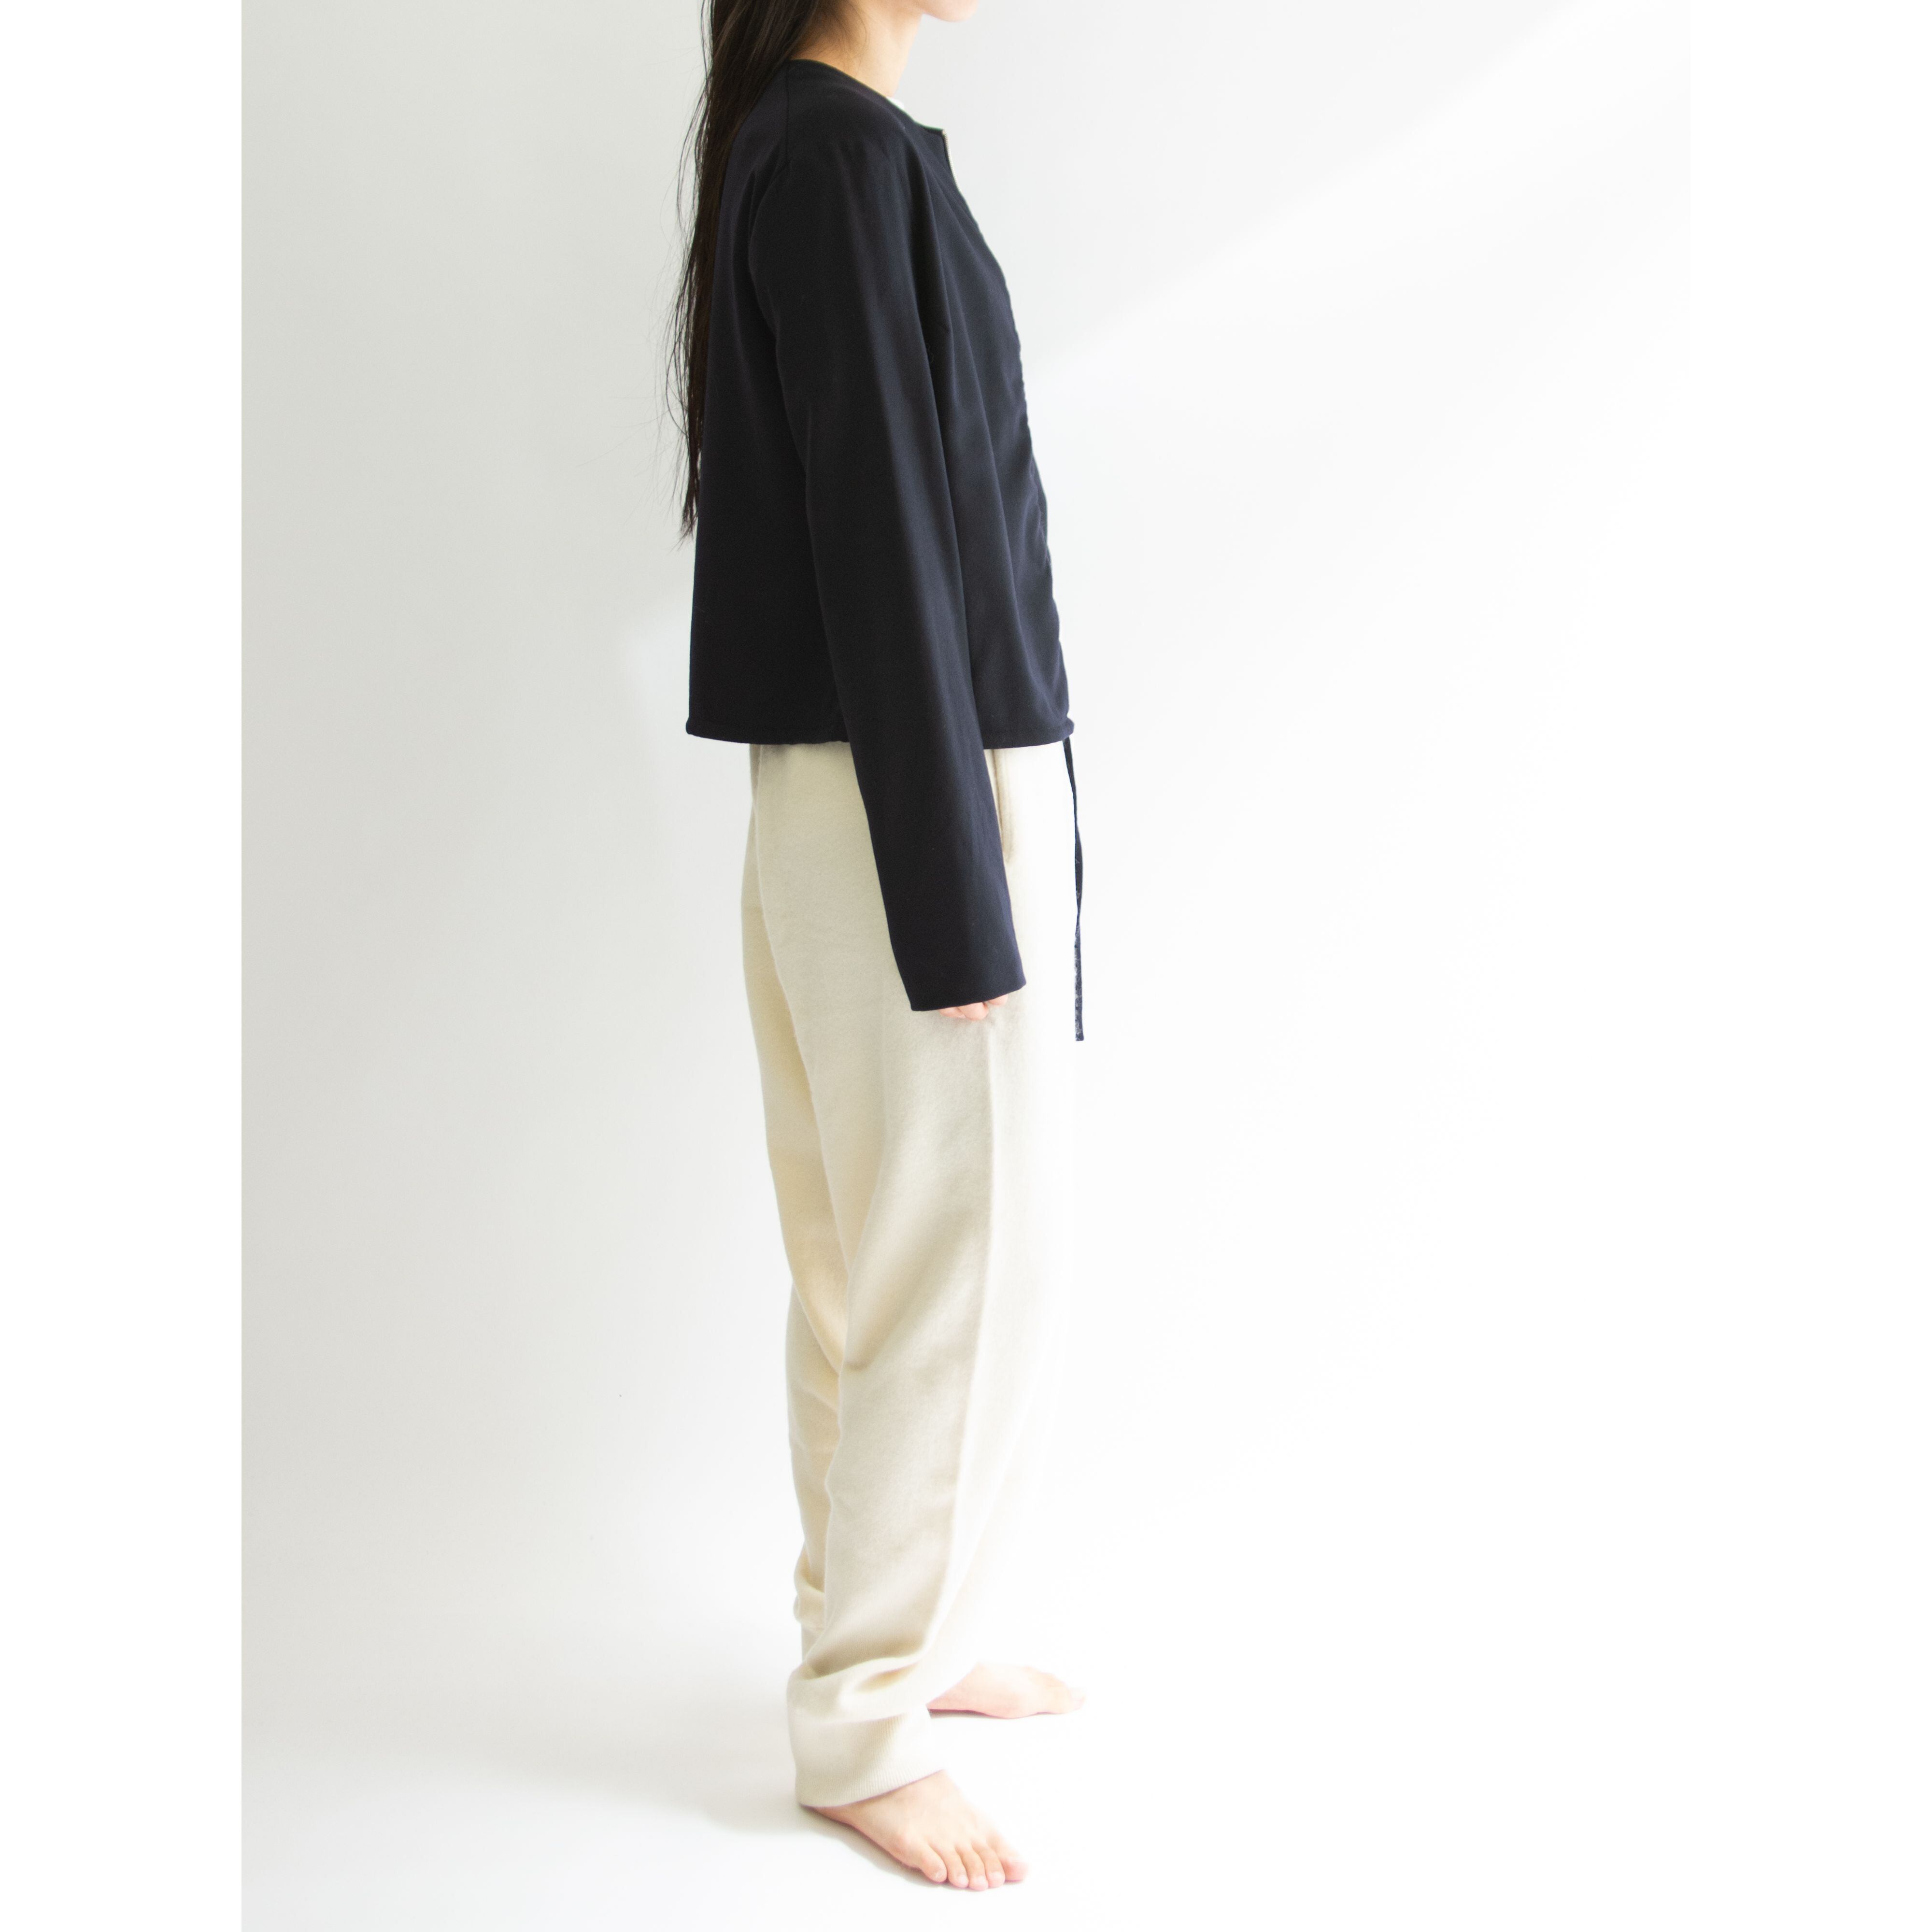 【Unknown Brand】Made in Italy Stretch Wool Collarless Jacket（イタリア製ストレッチウール ノーカラージャケット）